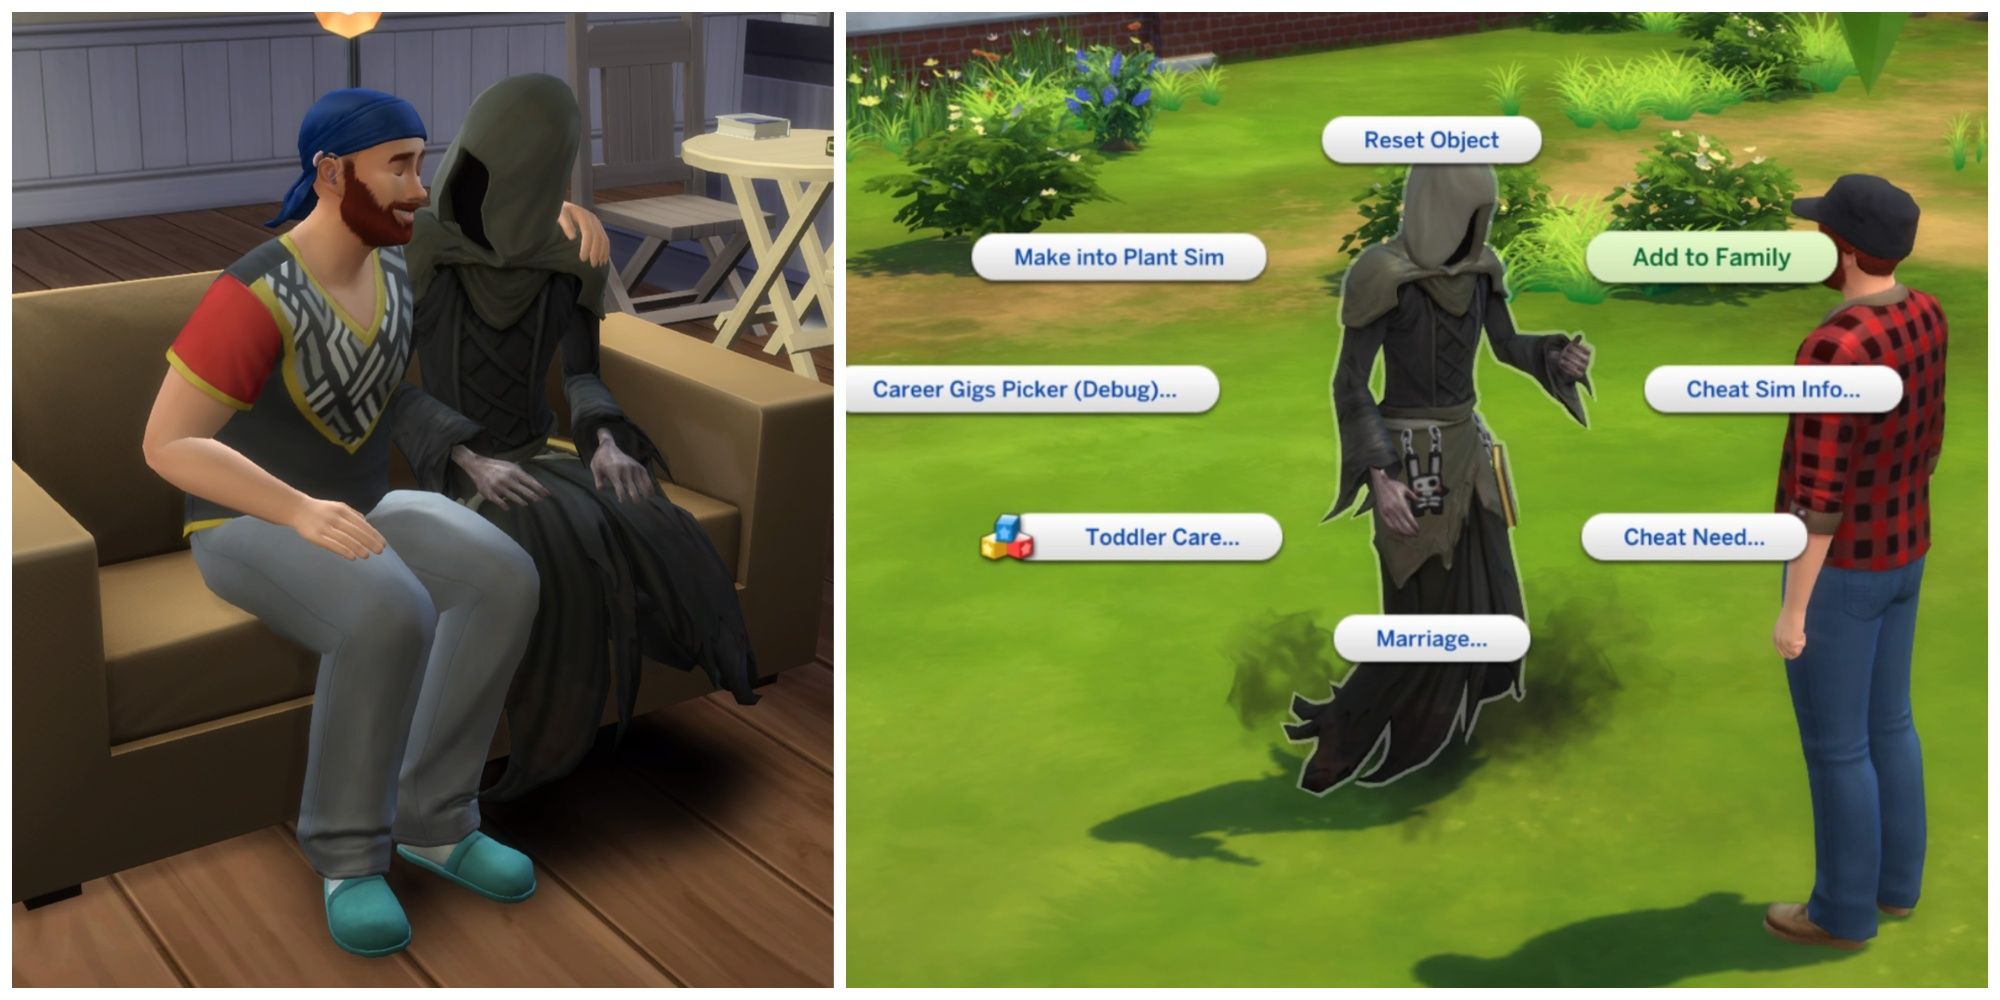 Romancing the Grim Reaper in The Sims 4